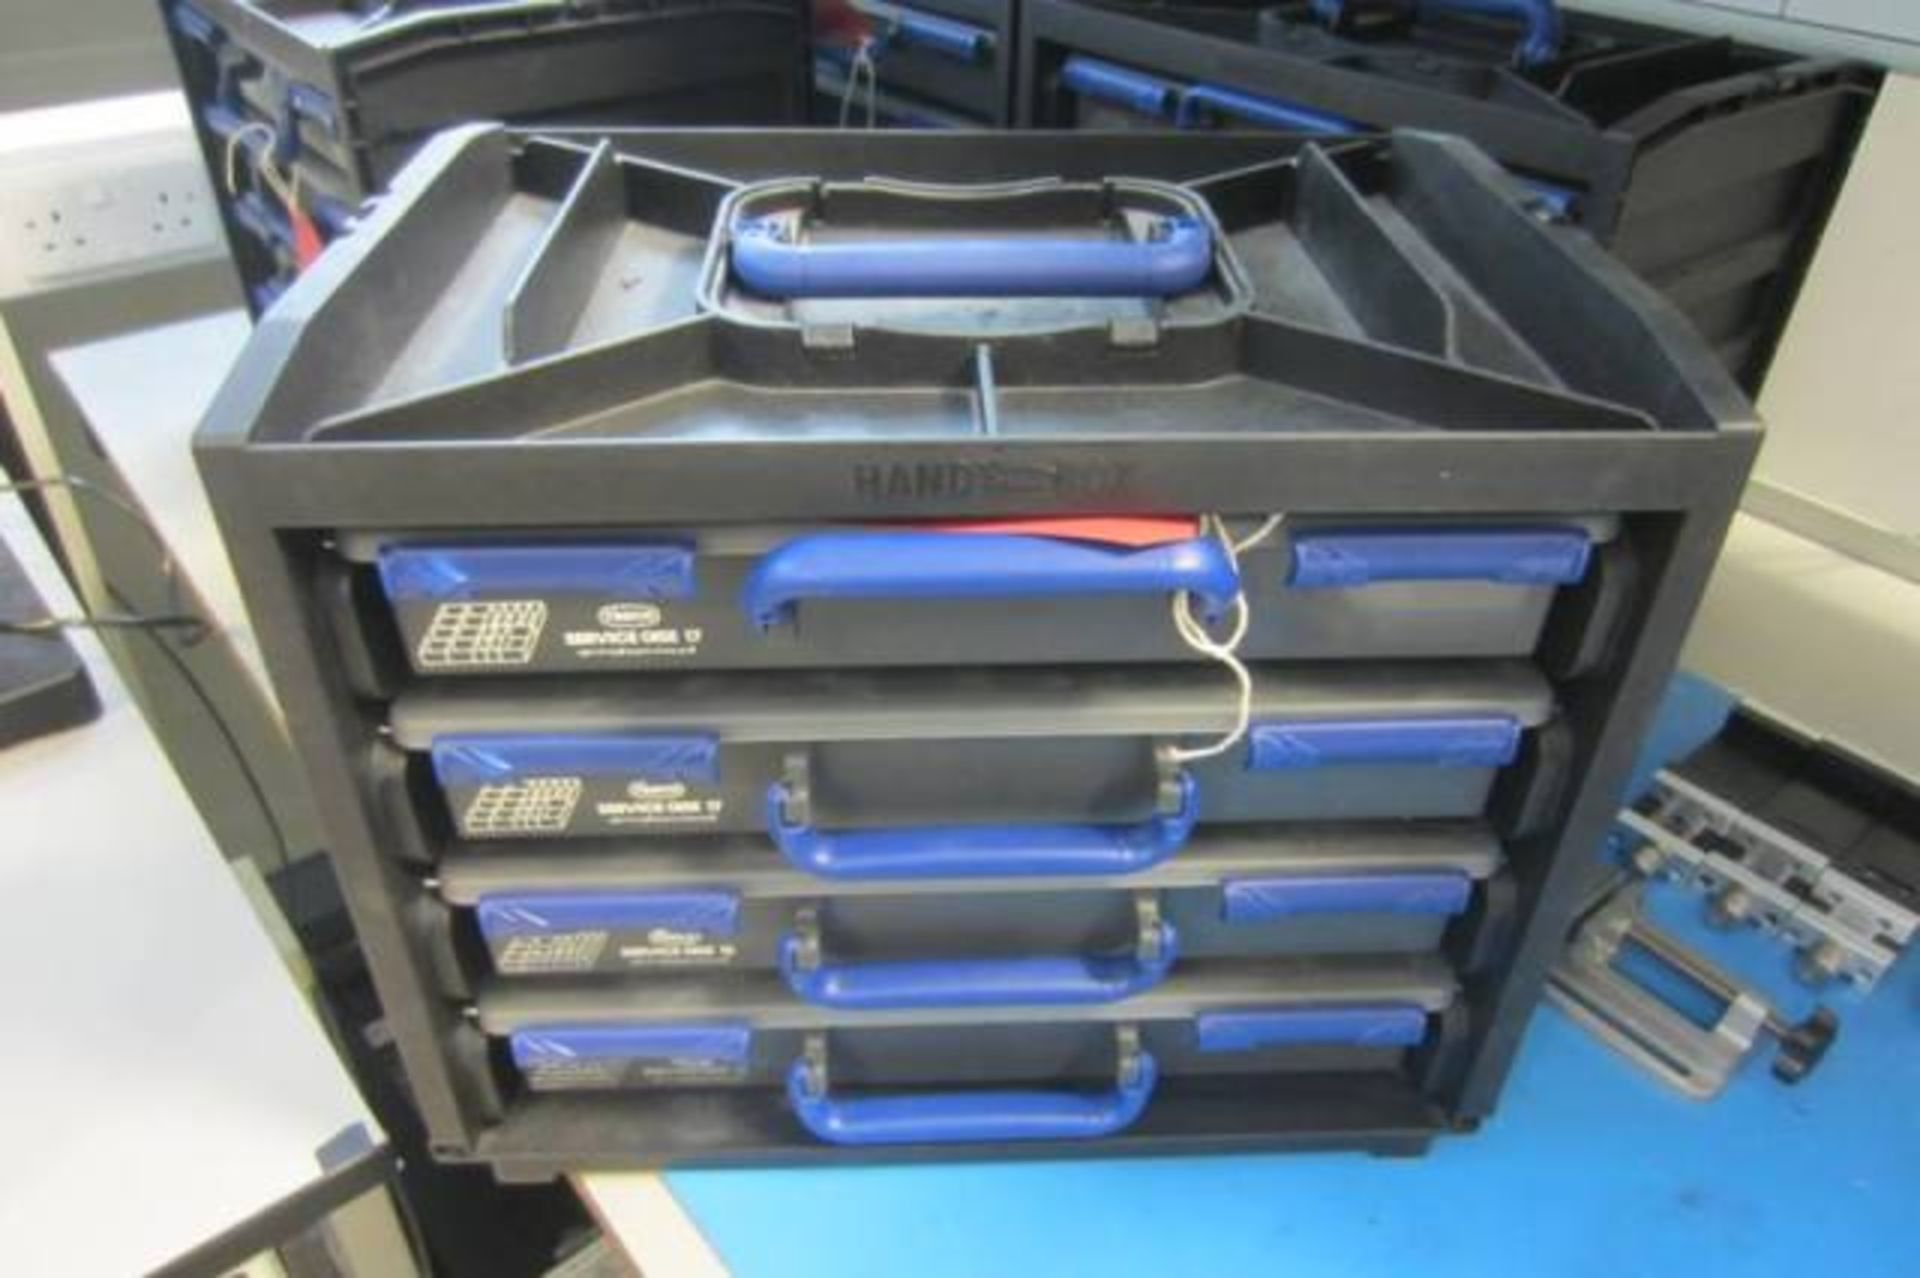 Handy Box 4 Drawer Component Compartments - Image 2 of 3